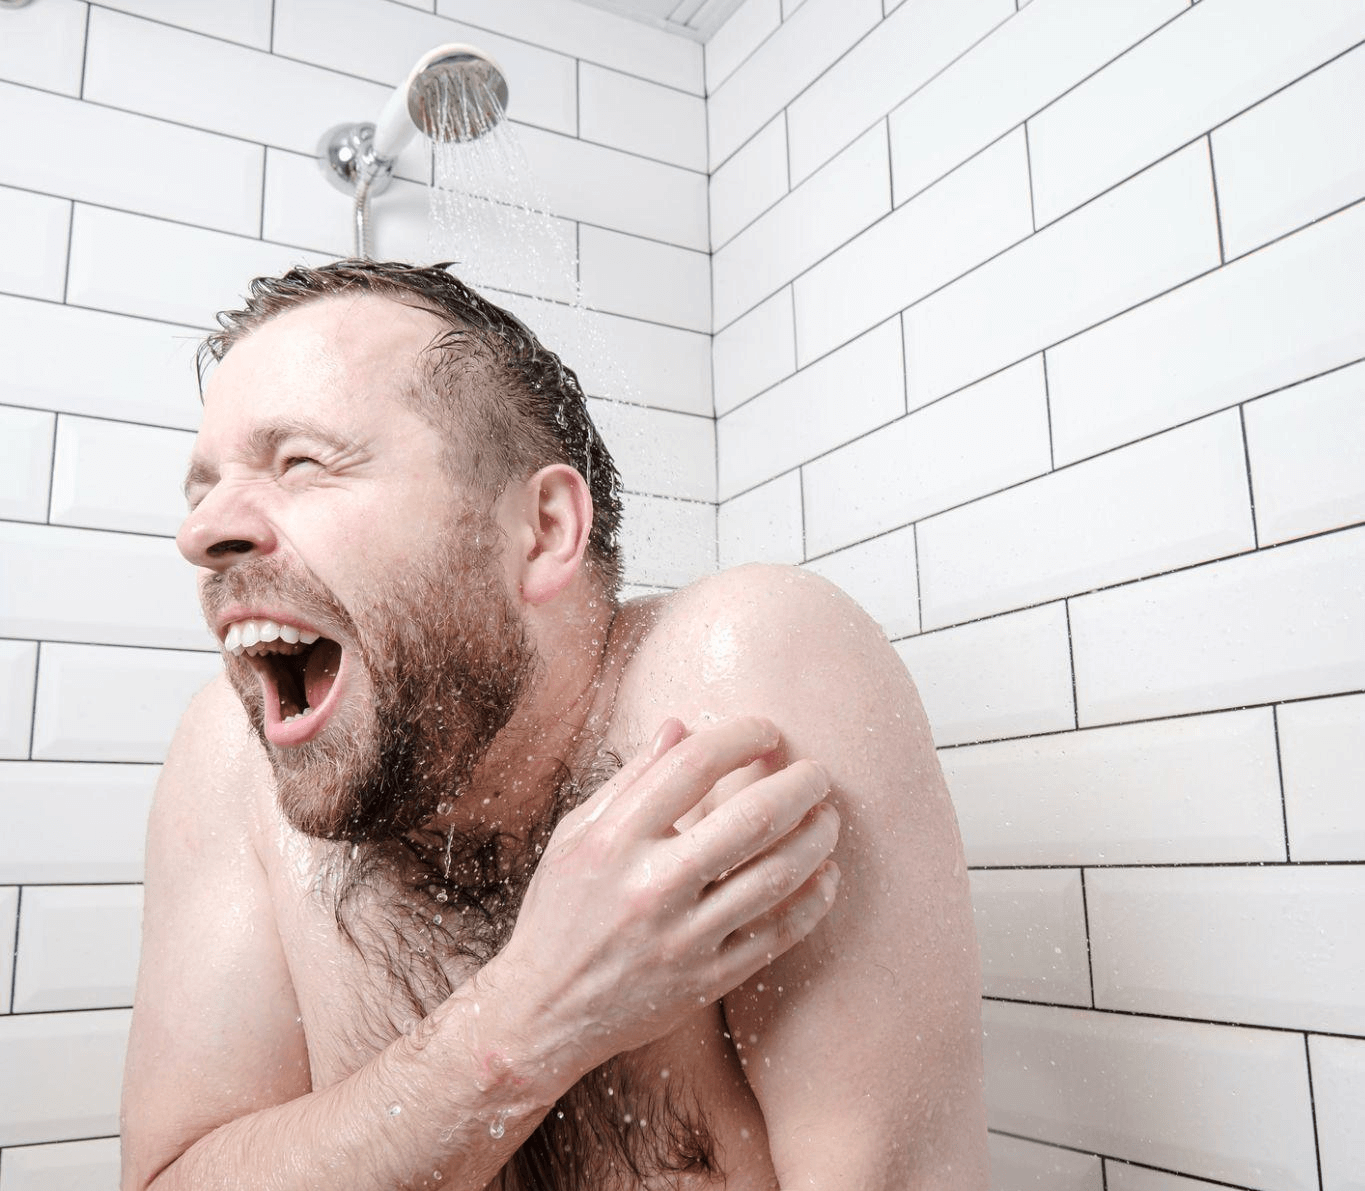 Young man in shower shrieks and shivers from cold water as he covers his chest with his arm